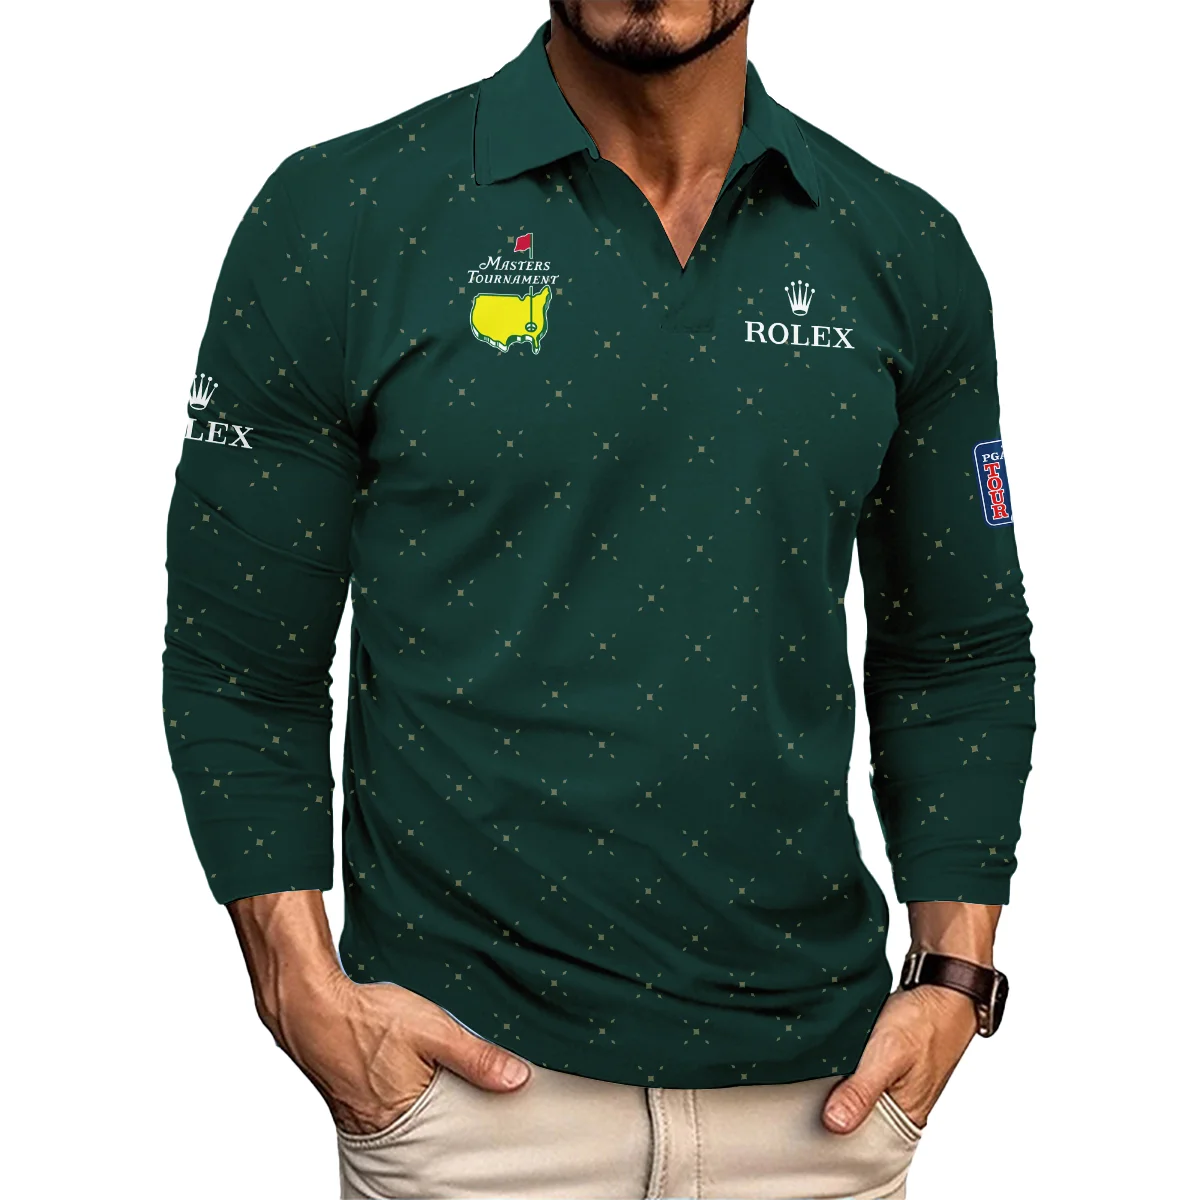 Diamond Shapes With Geometric Pattern Masters Tournament Rolex Long Polo Shirt Style Classic Long Polo Shirt For Men